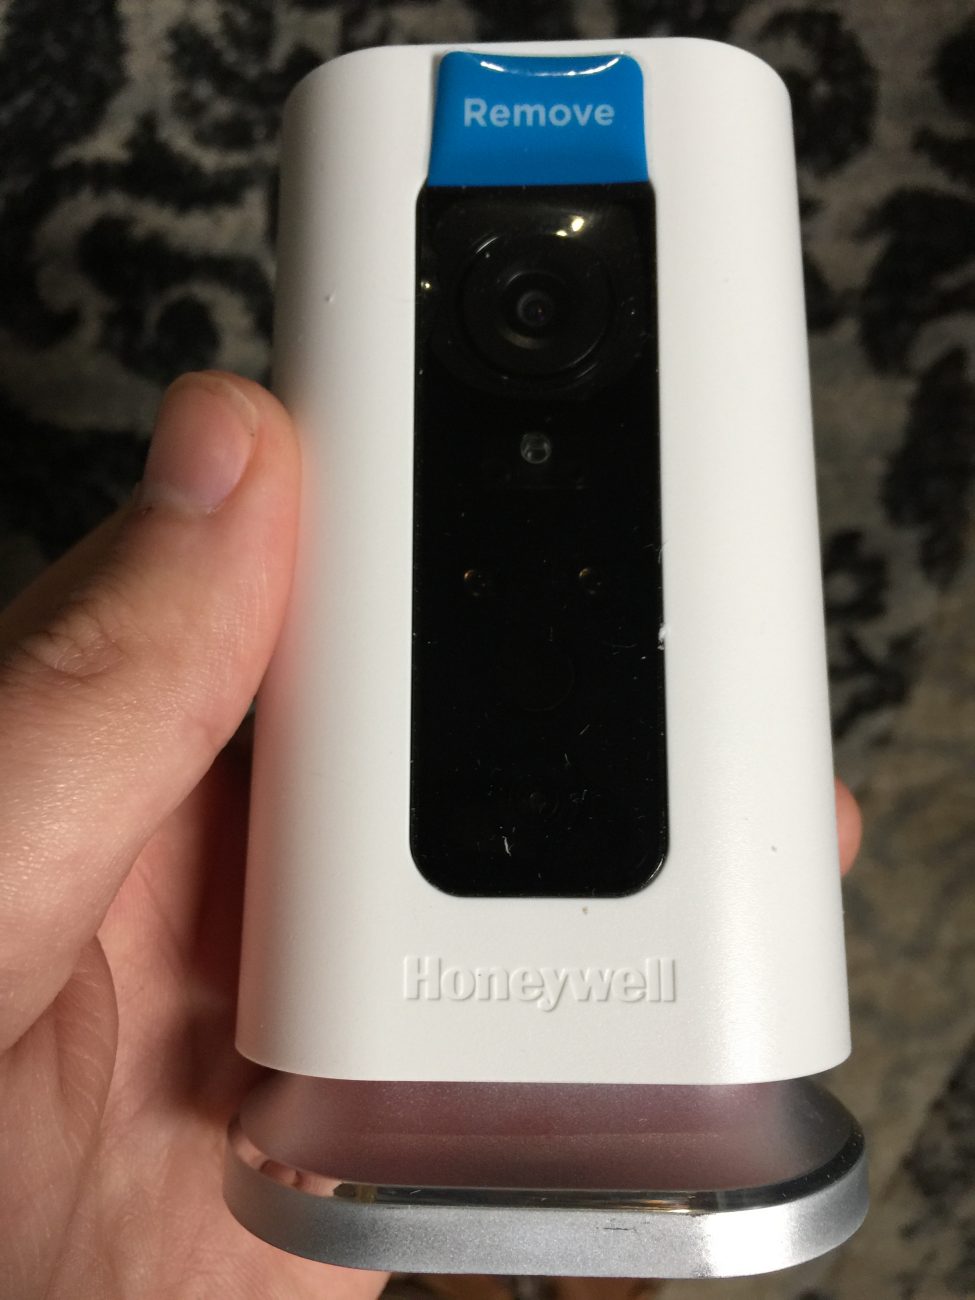 Hands On Review: Honeywell Lyric C1 Wi-Fi Security Camera, Hands On Review, Honeywell Lyric C1, Wi-Fi Security Camera, Security Camera, camera, security, IoT, smart home, wi-fi